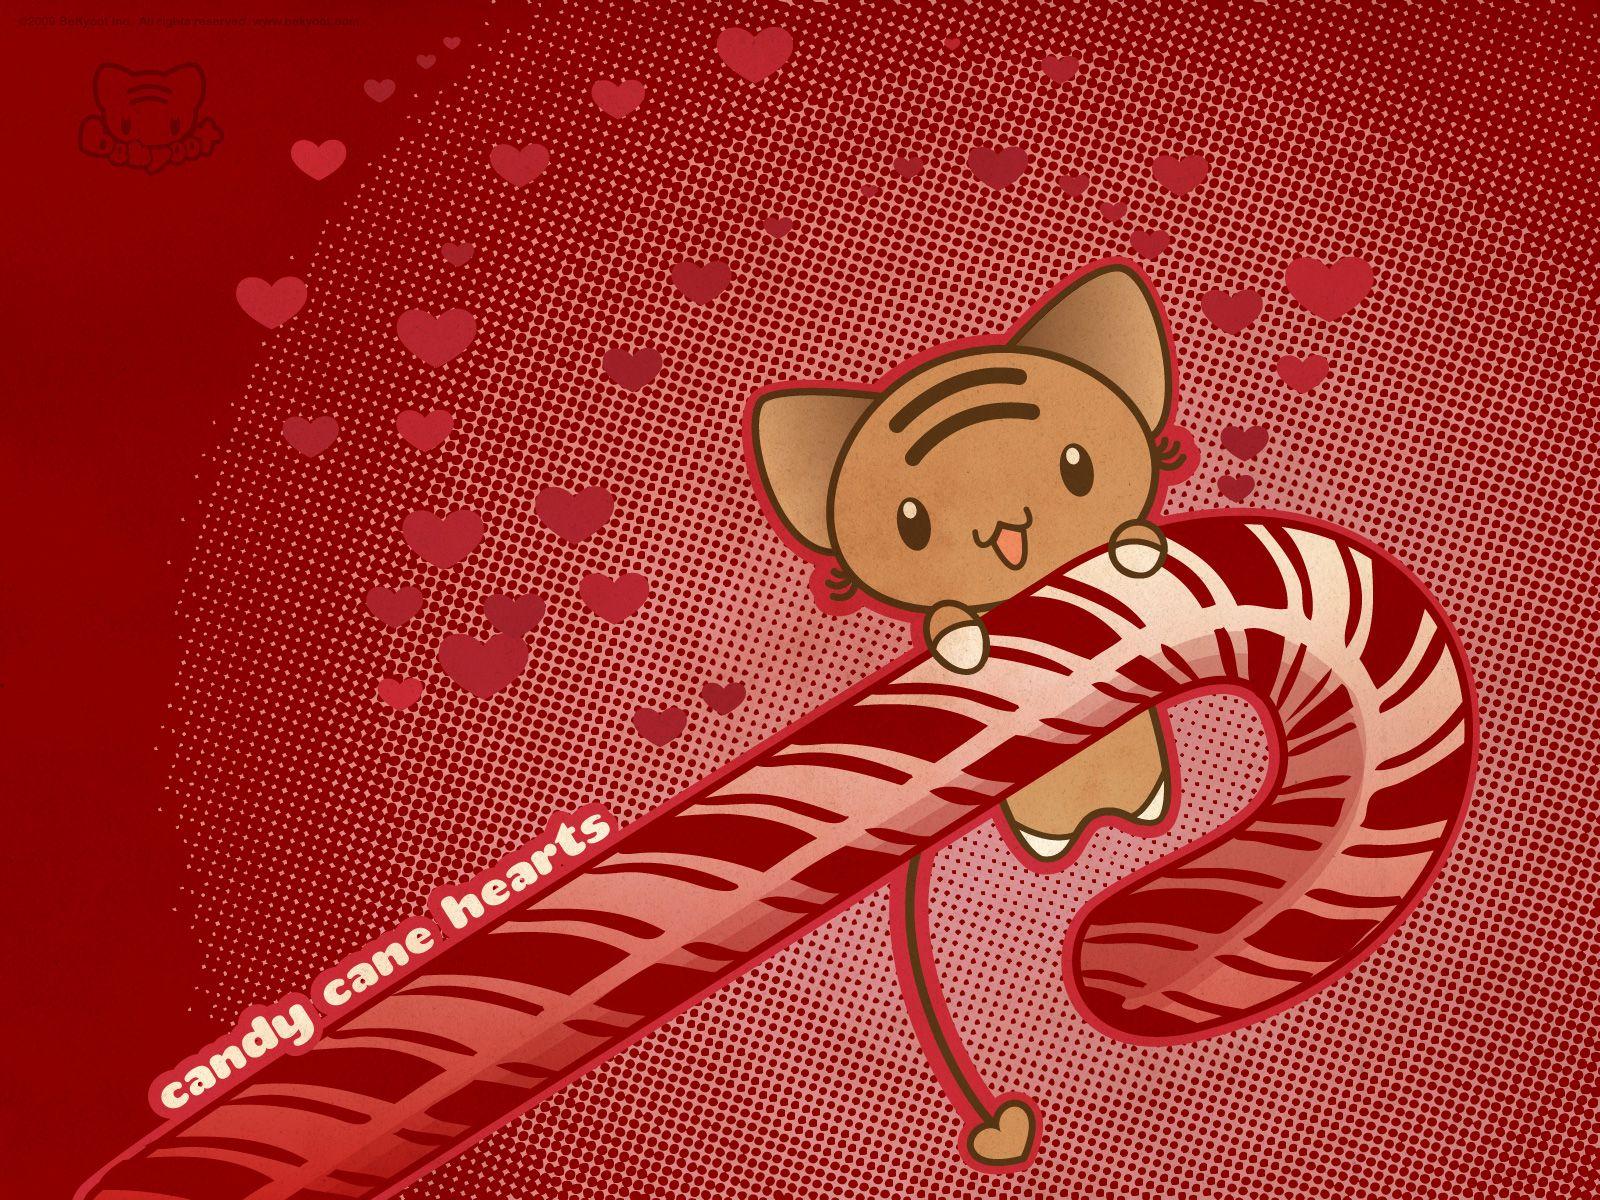 Candy Canes image candy cane cat HD wallpaper and background photo